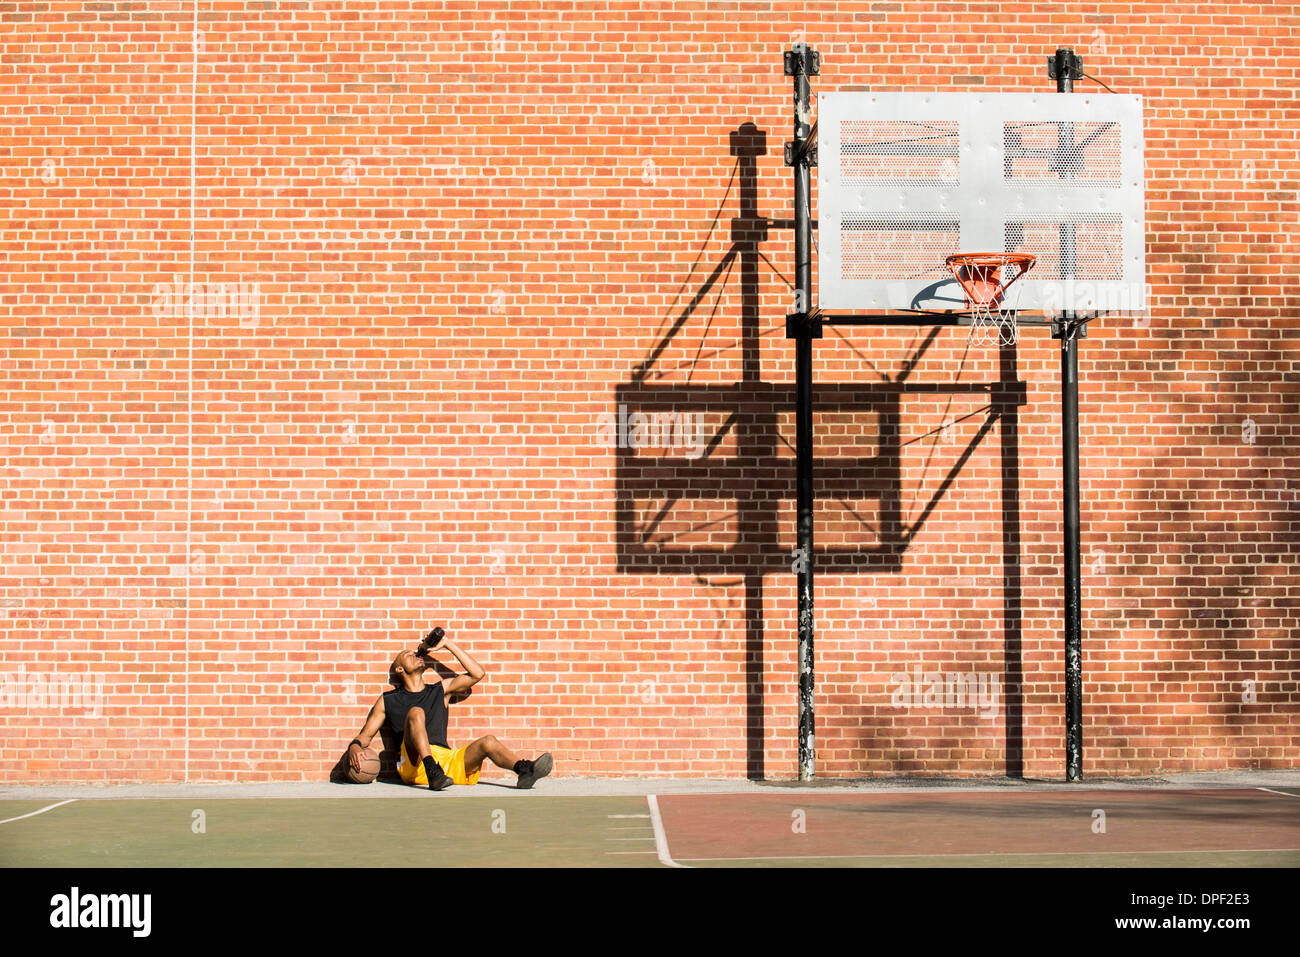 Basketball player resting on court Stock Photo